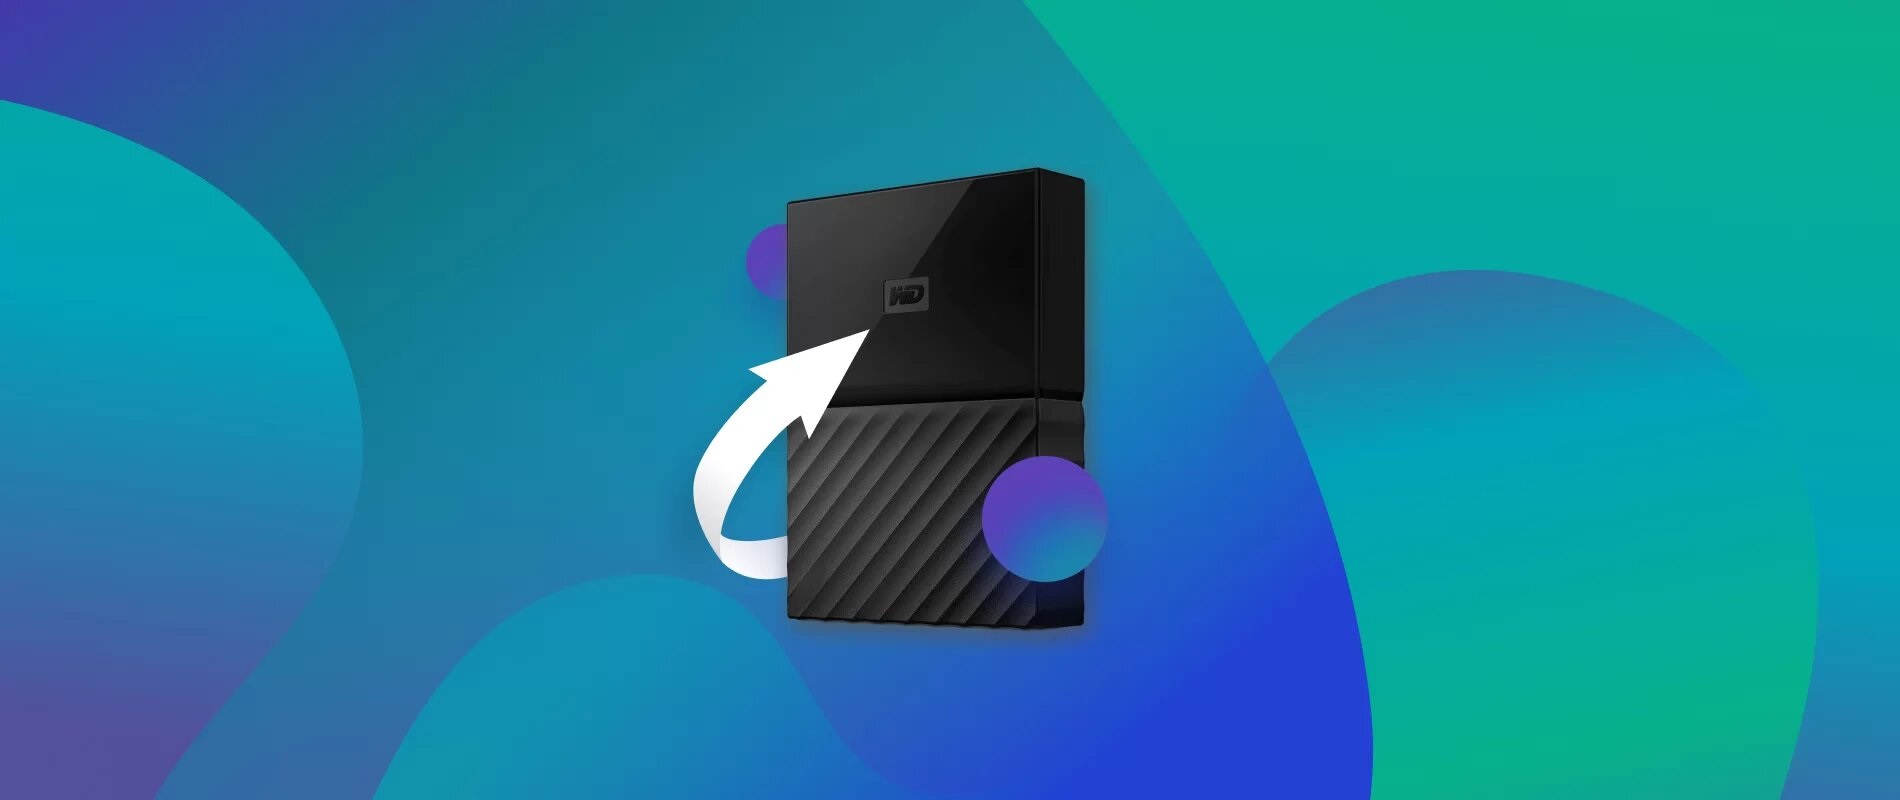 How To Recover Data From Wd My Passport External Hard Drive Free